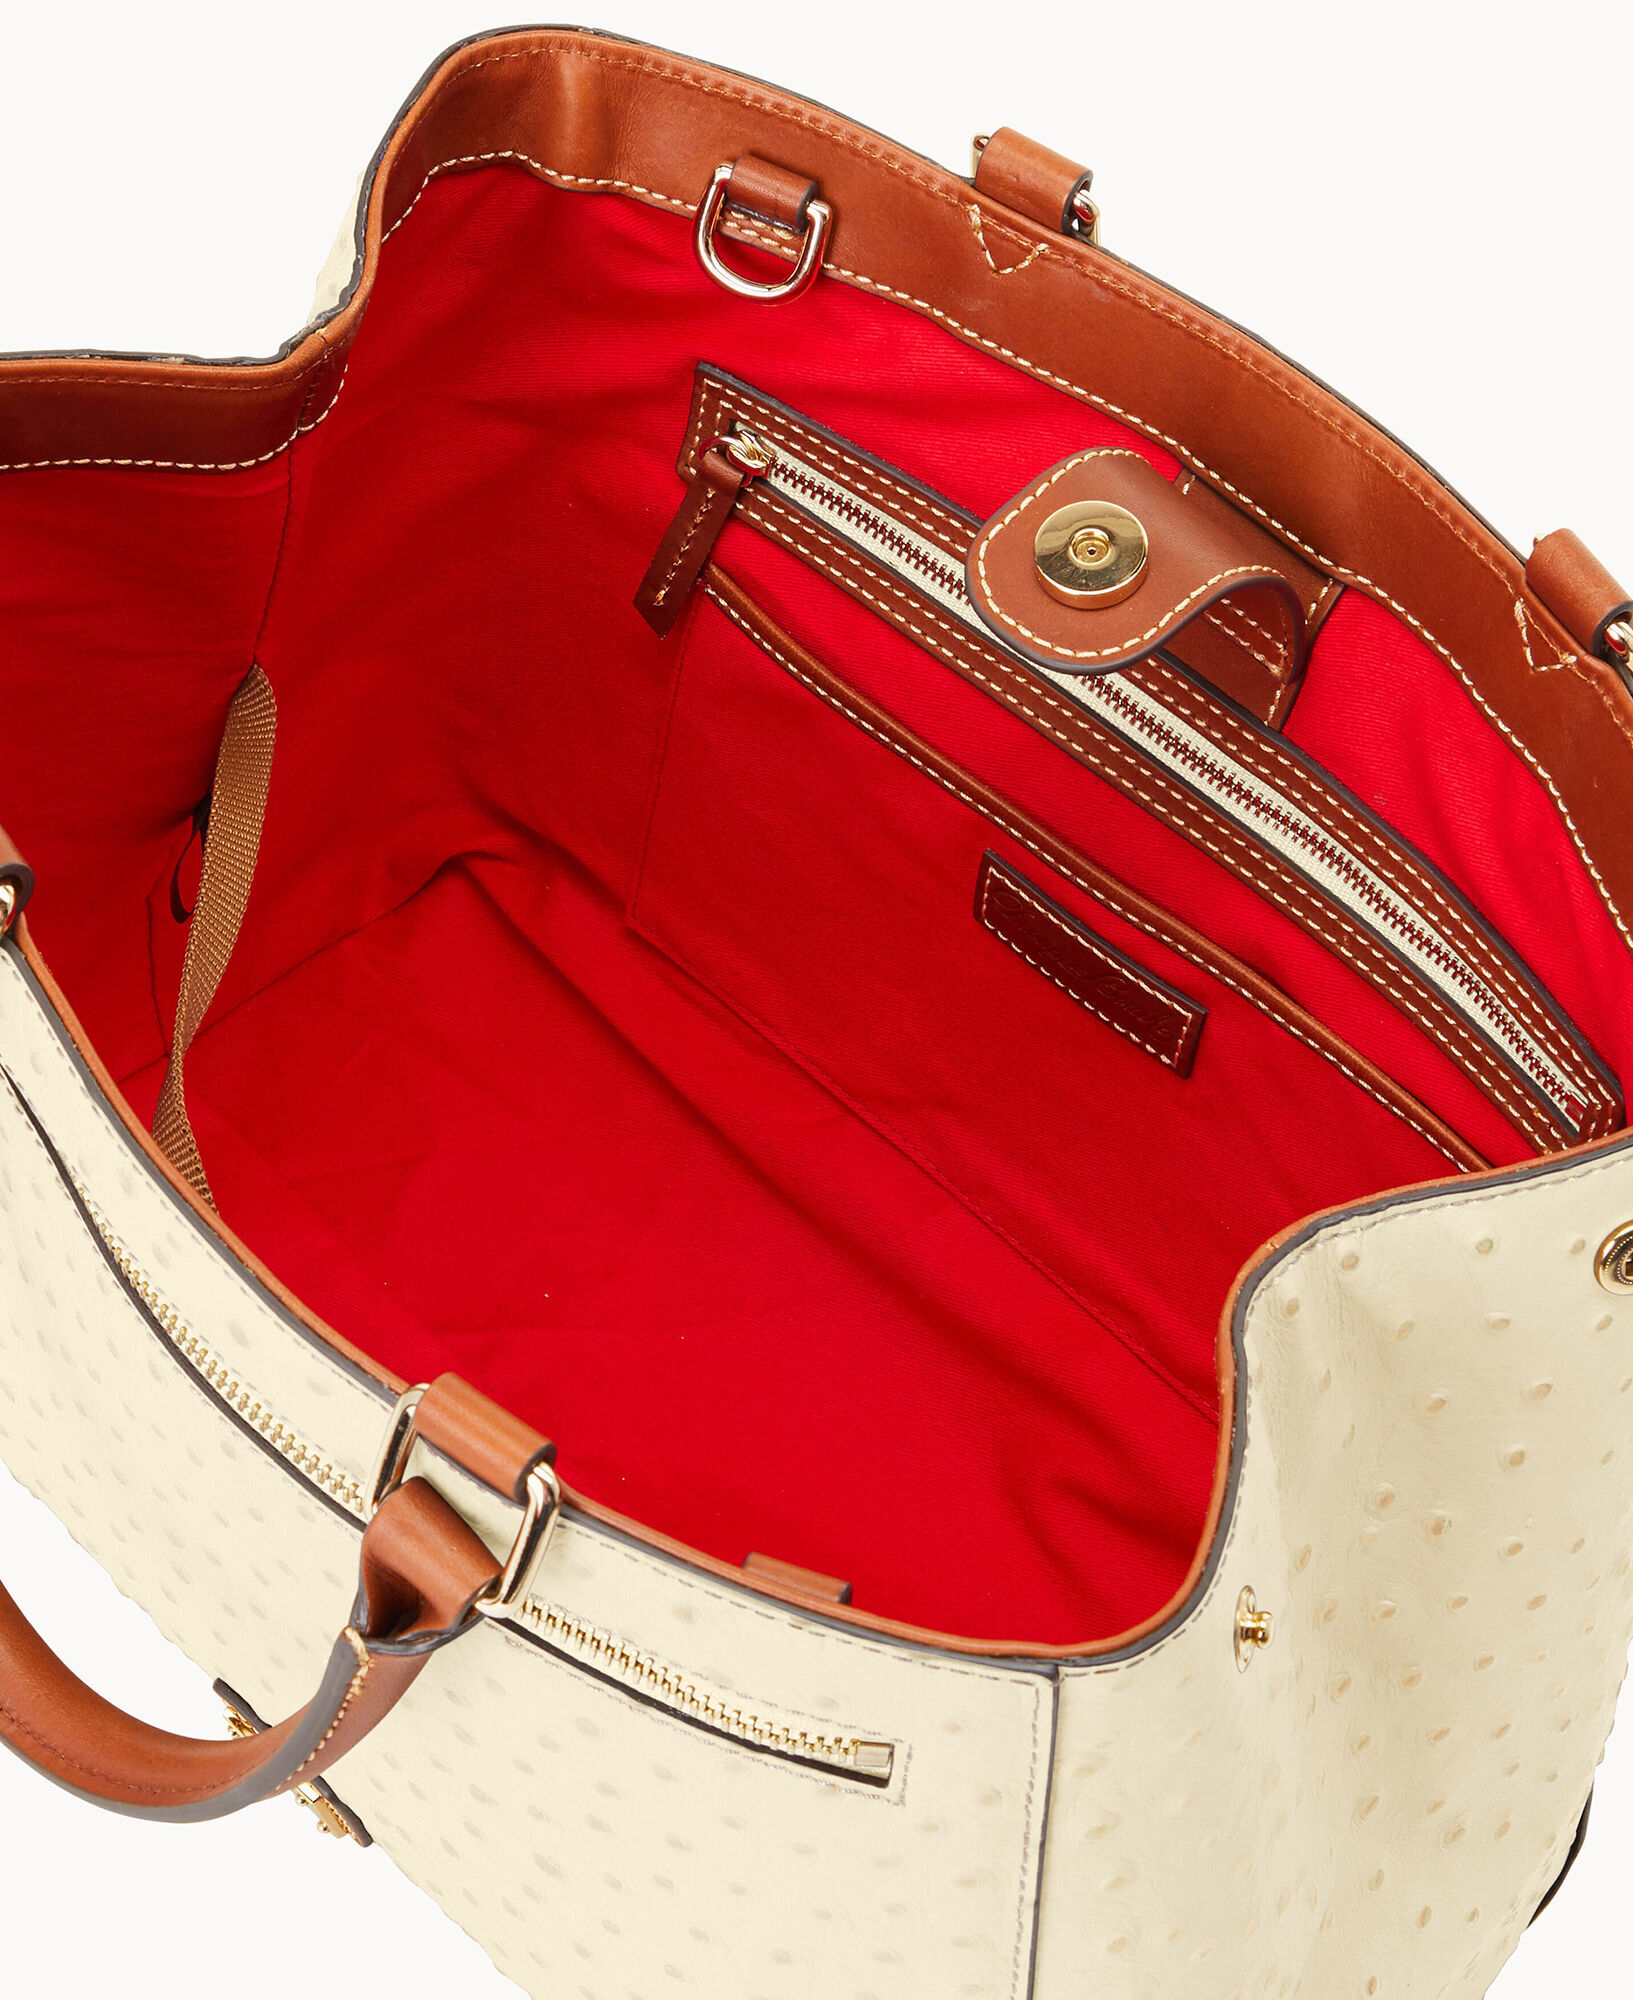 Dooney & Bourke Bag Will Be Everywhere This Fall — 30% Off!